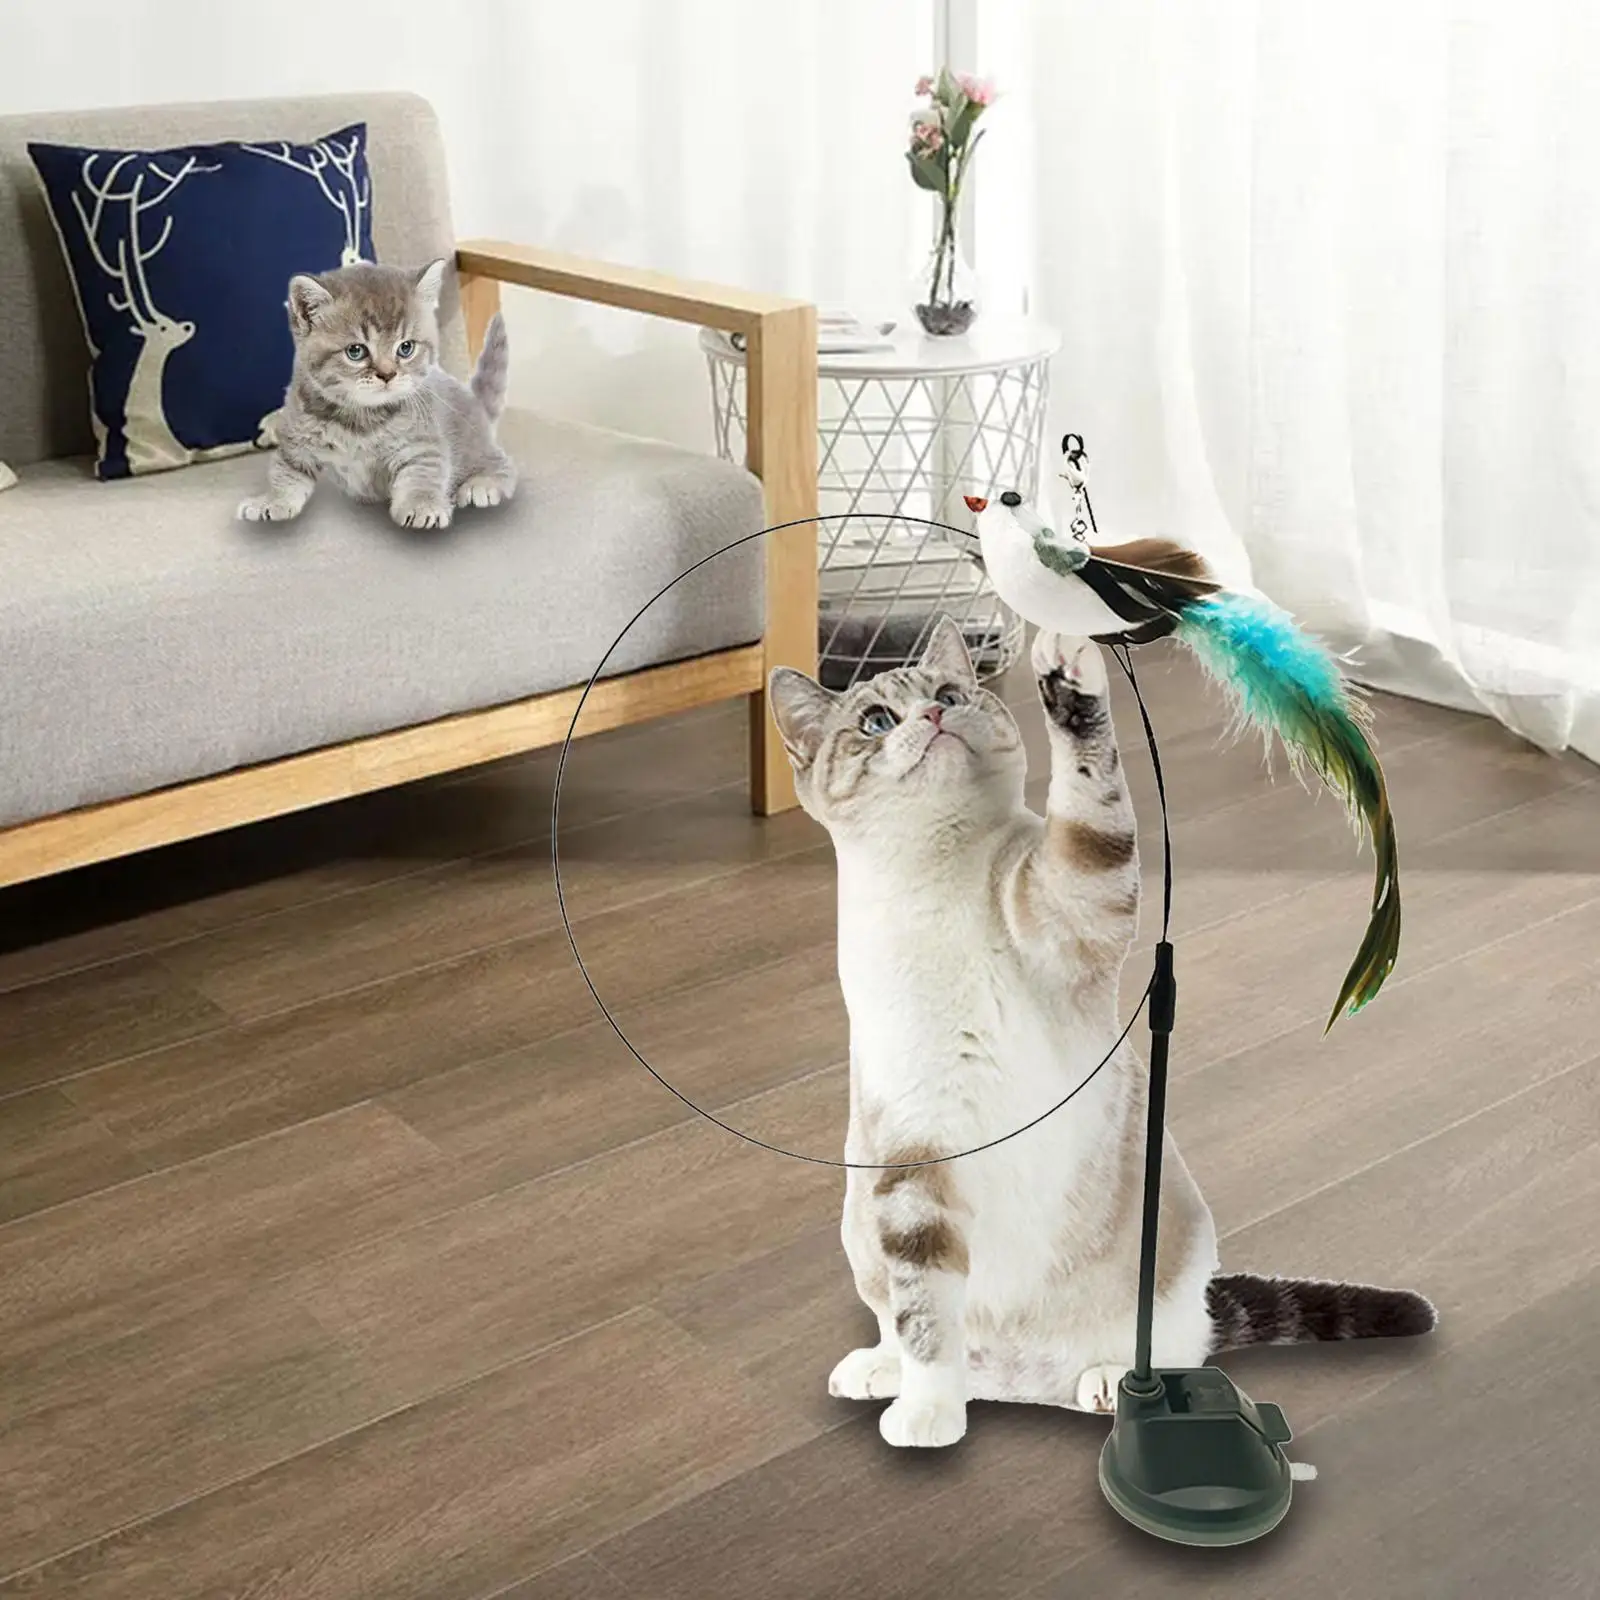 Simulation Bird Shape Feather Cat Stick Sucker Toy with Suction Cup, Cat Supplies Kitten Play Funny Good Tenacity with Bell